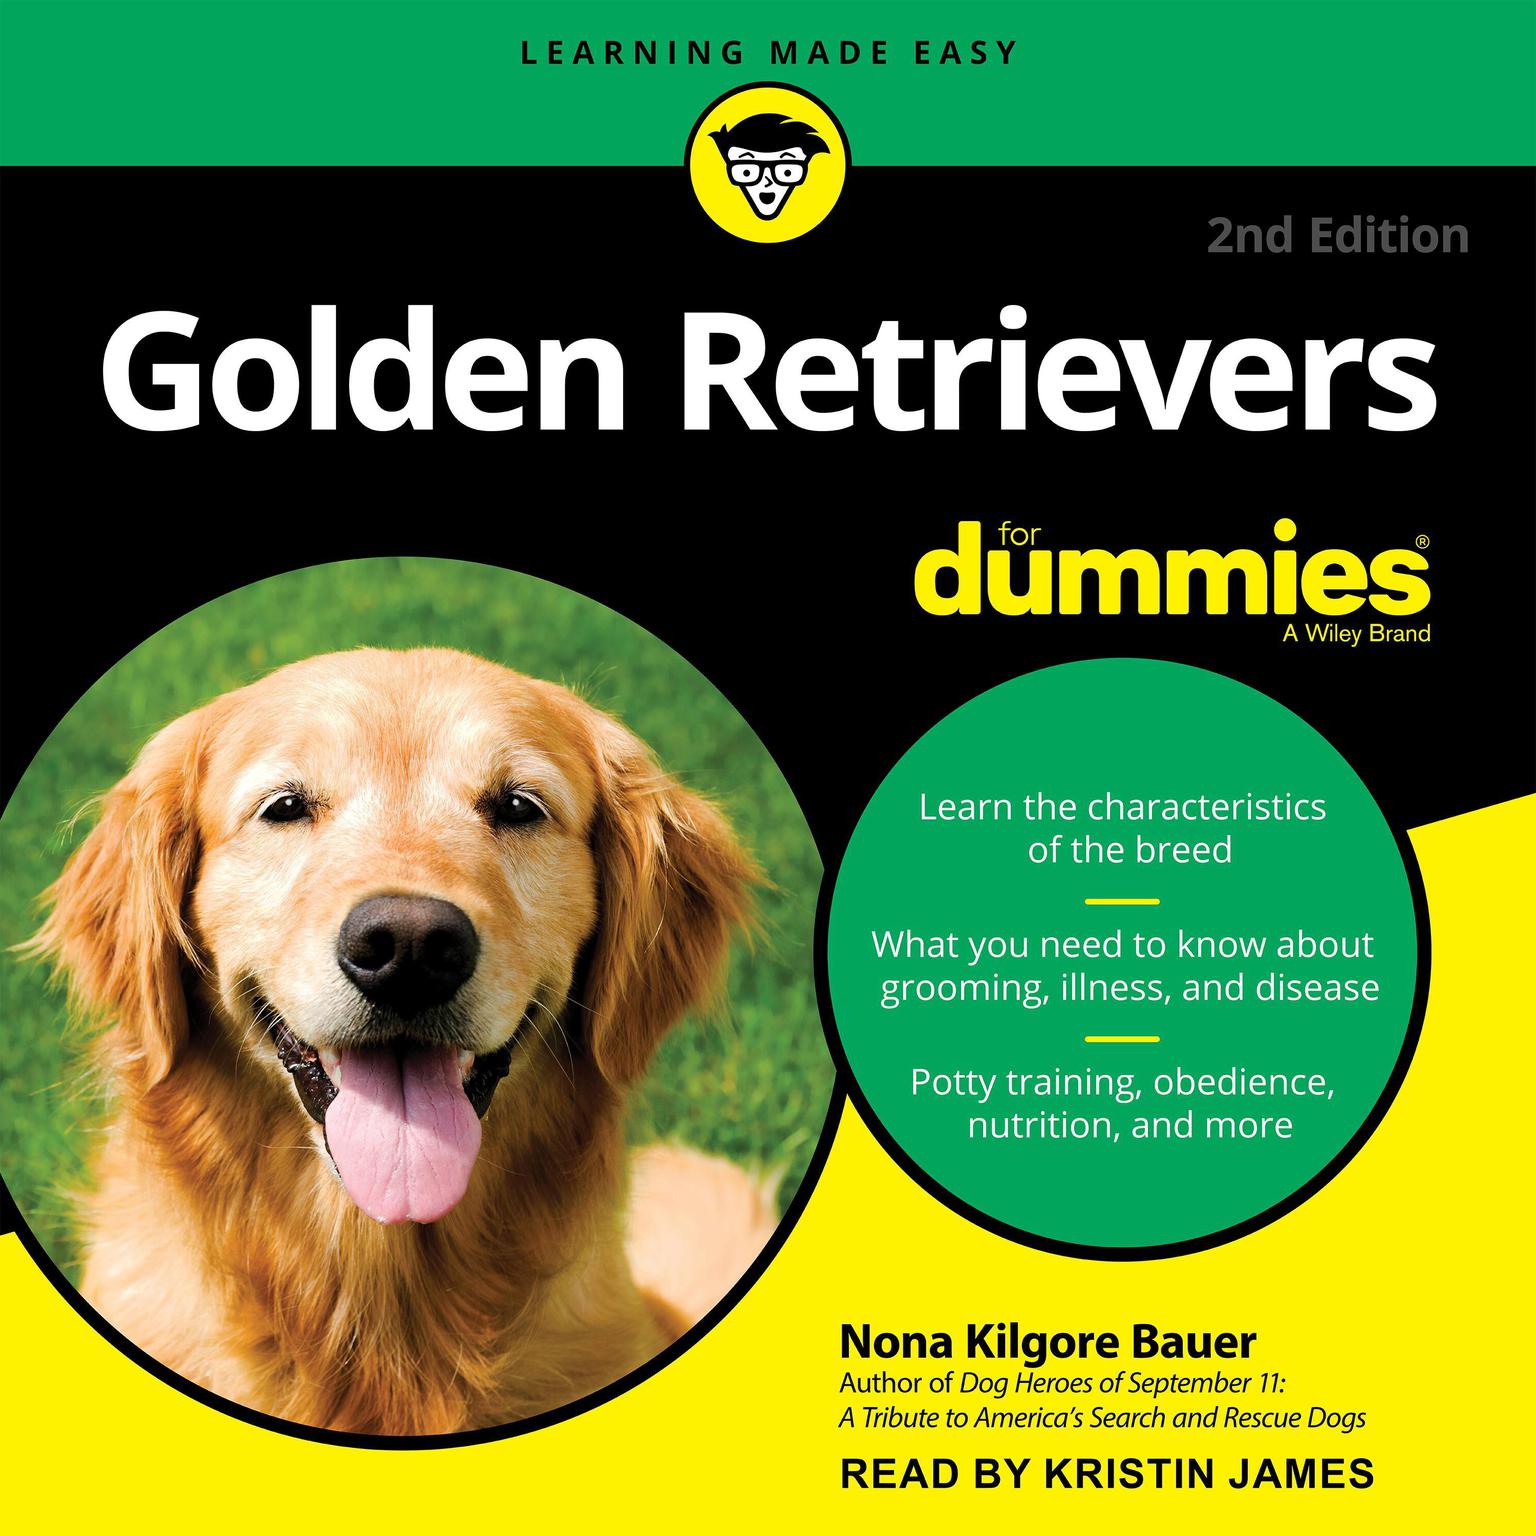 Golden Retrievers For Dummies: 2nd Edition Audiobook, by Nona Kilgore Bauer